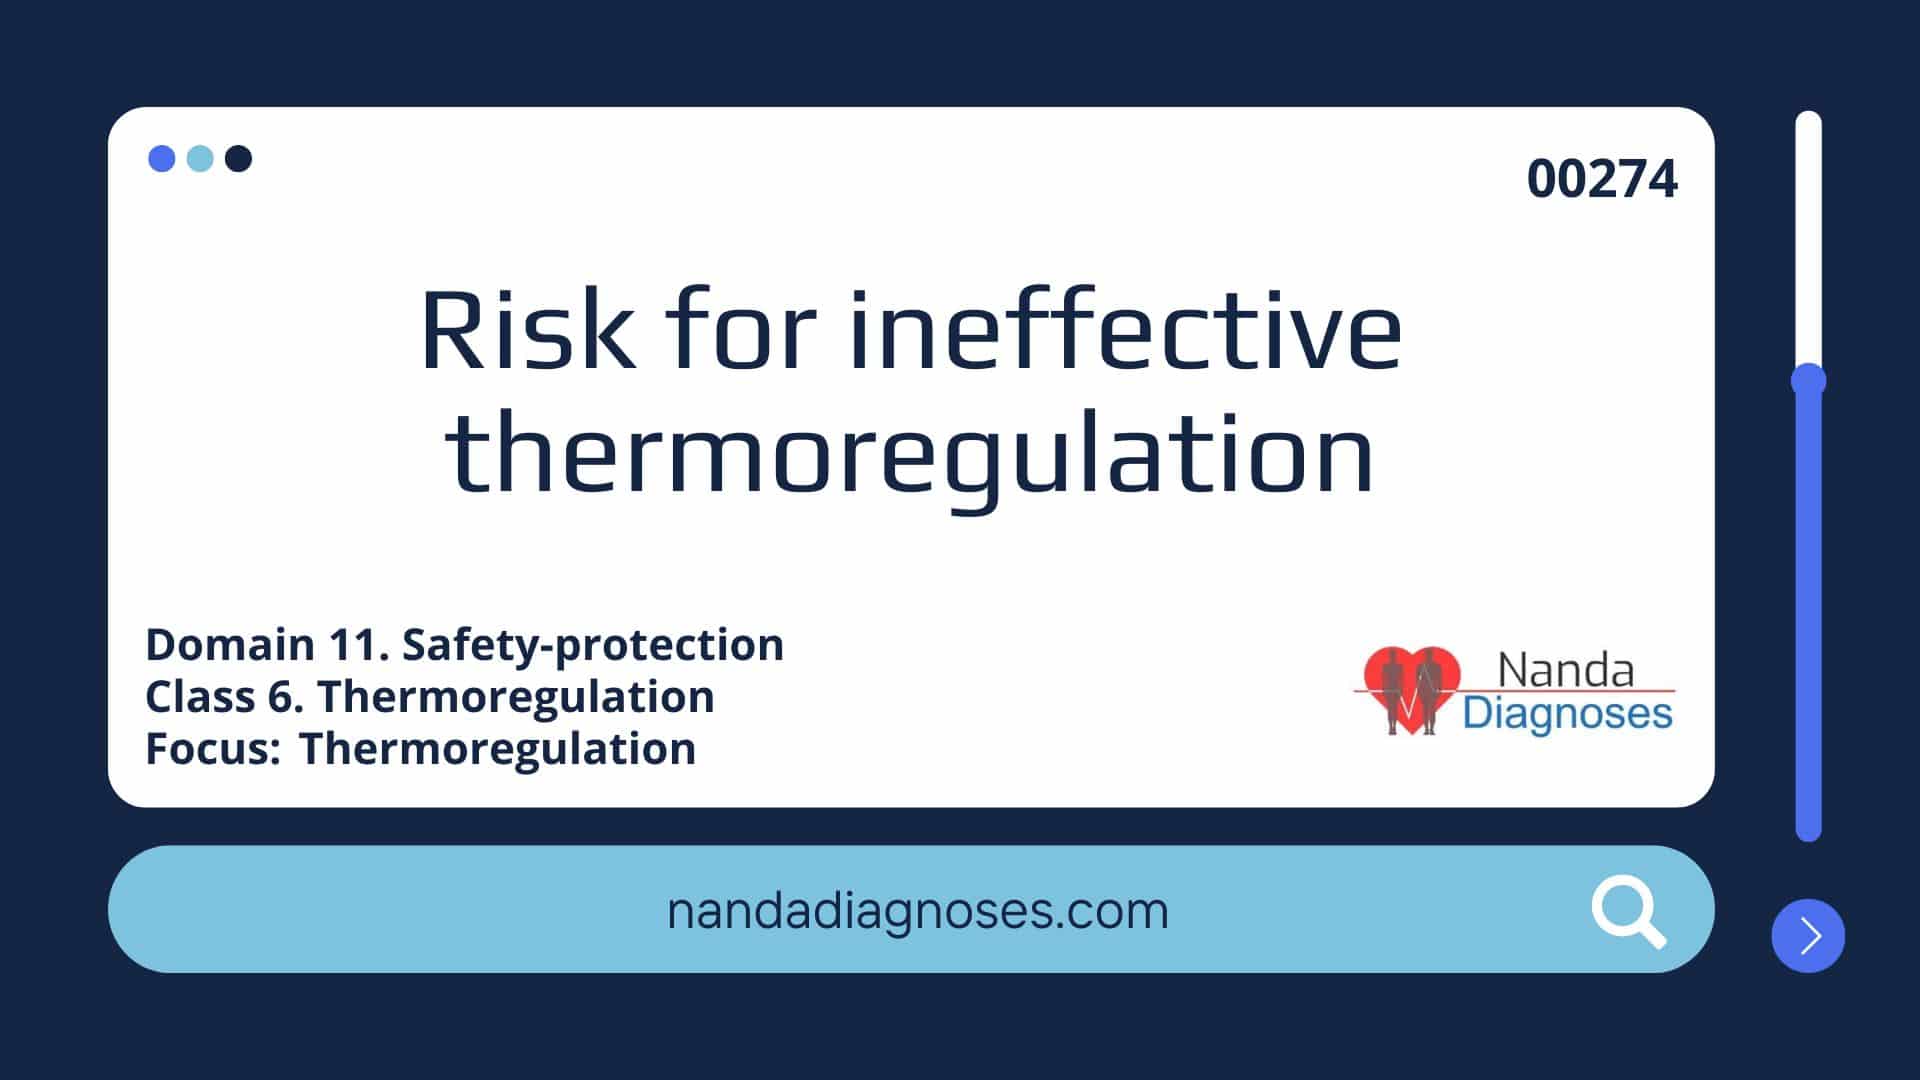 Nursing diagnosis Risk for ineffective thermoregulation